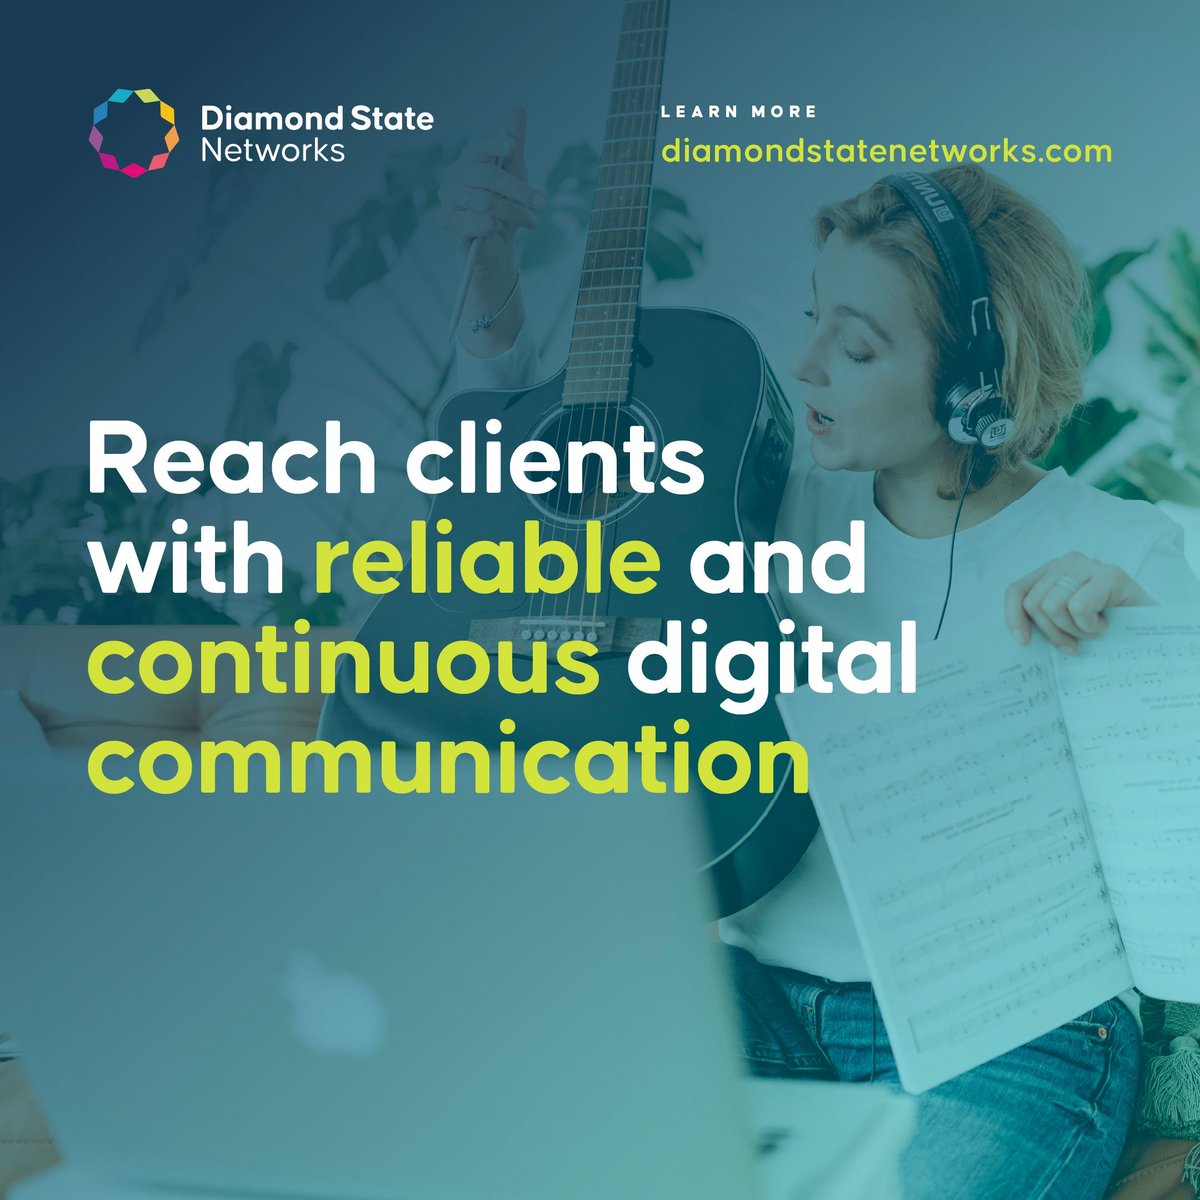 Build stronger relationships with your clients through reliable and continuous digital communication powered by DSN’s fiber internet. Our dependable fiber network keeps you connected to your customers. Learn more at diamondstatenetworks.com 

#dsn #customerrelations #smallbusiness